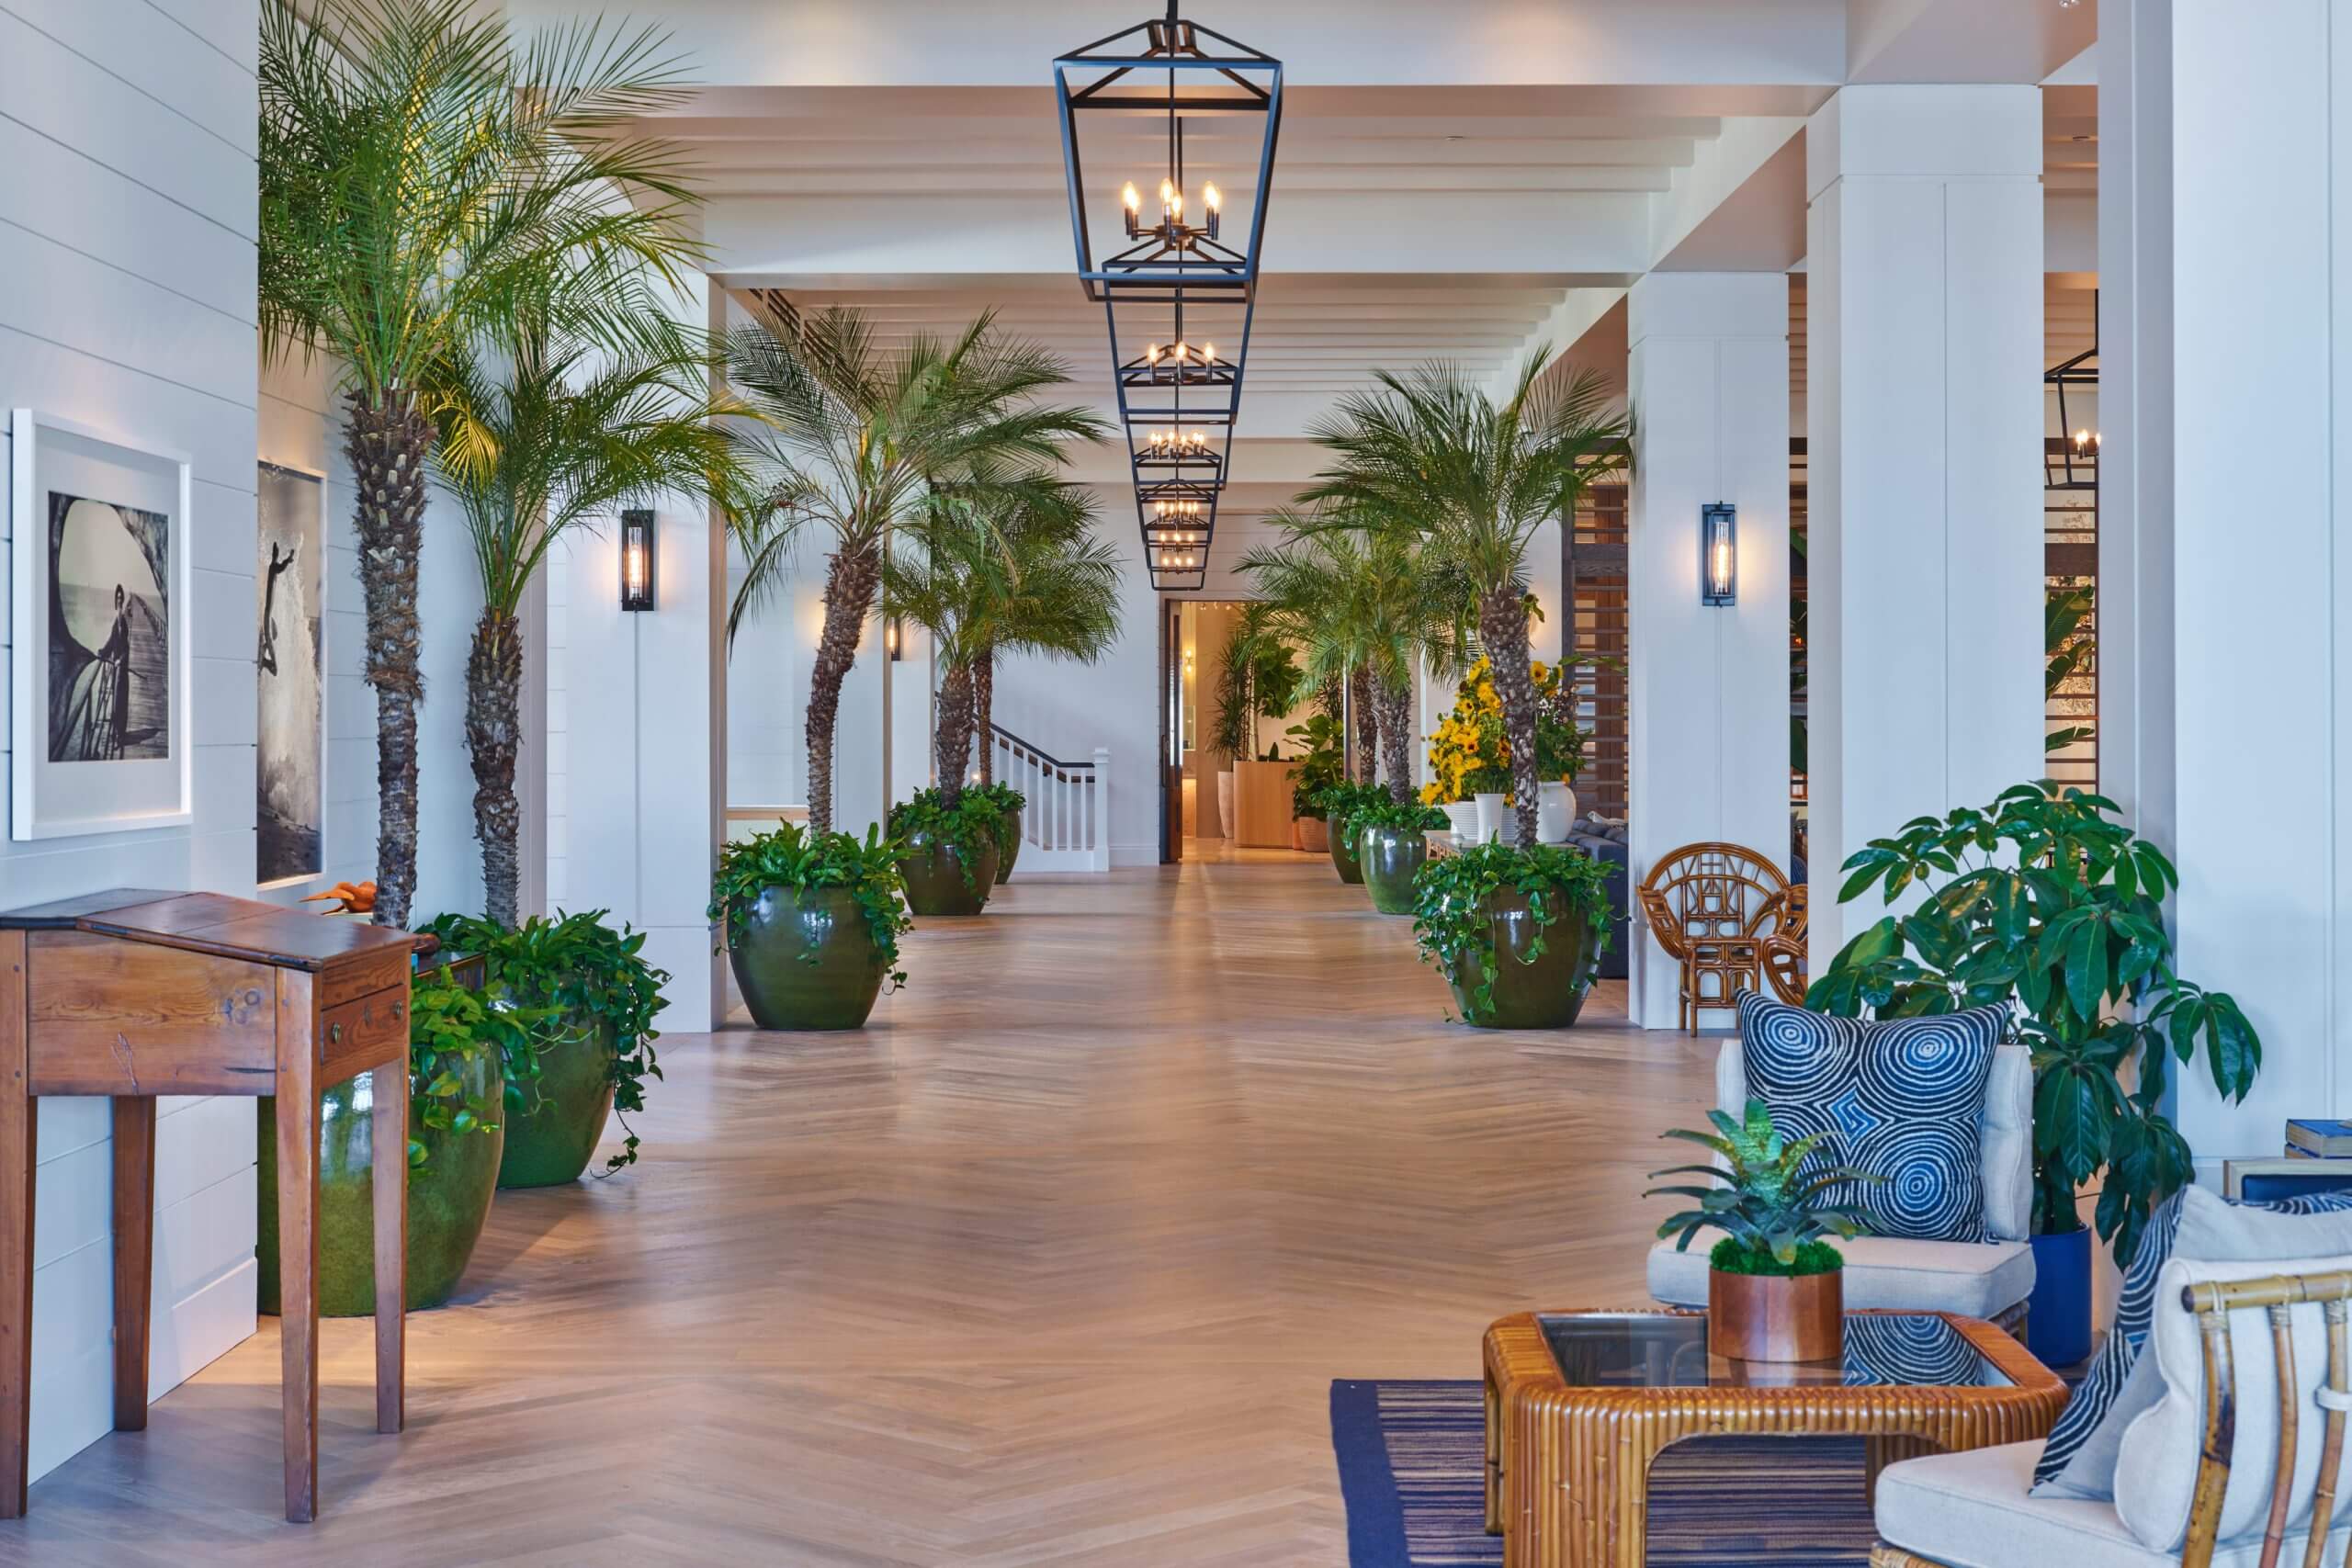 Lobby Hallway with Palm Trees with lights